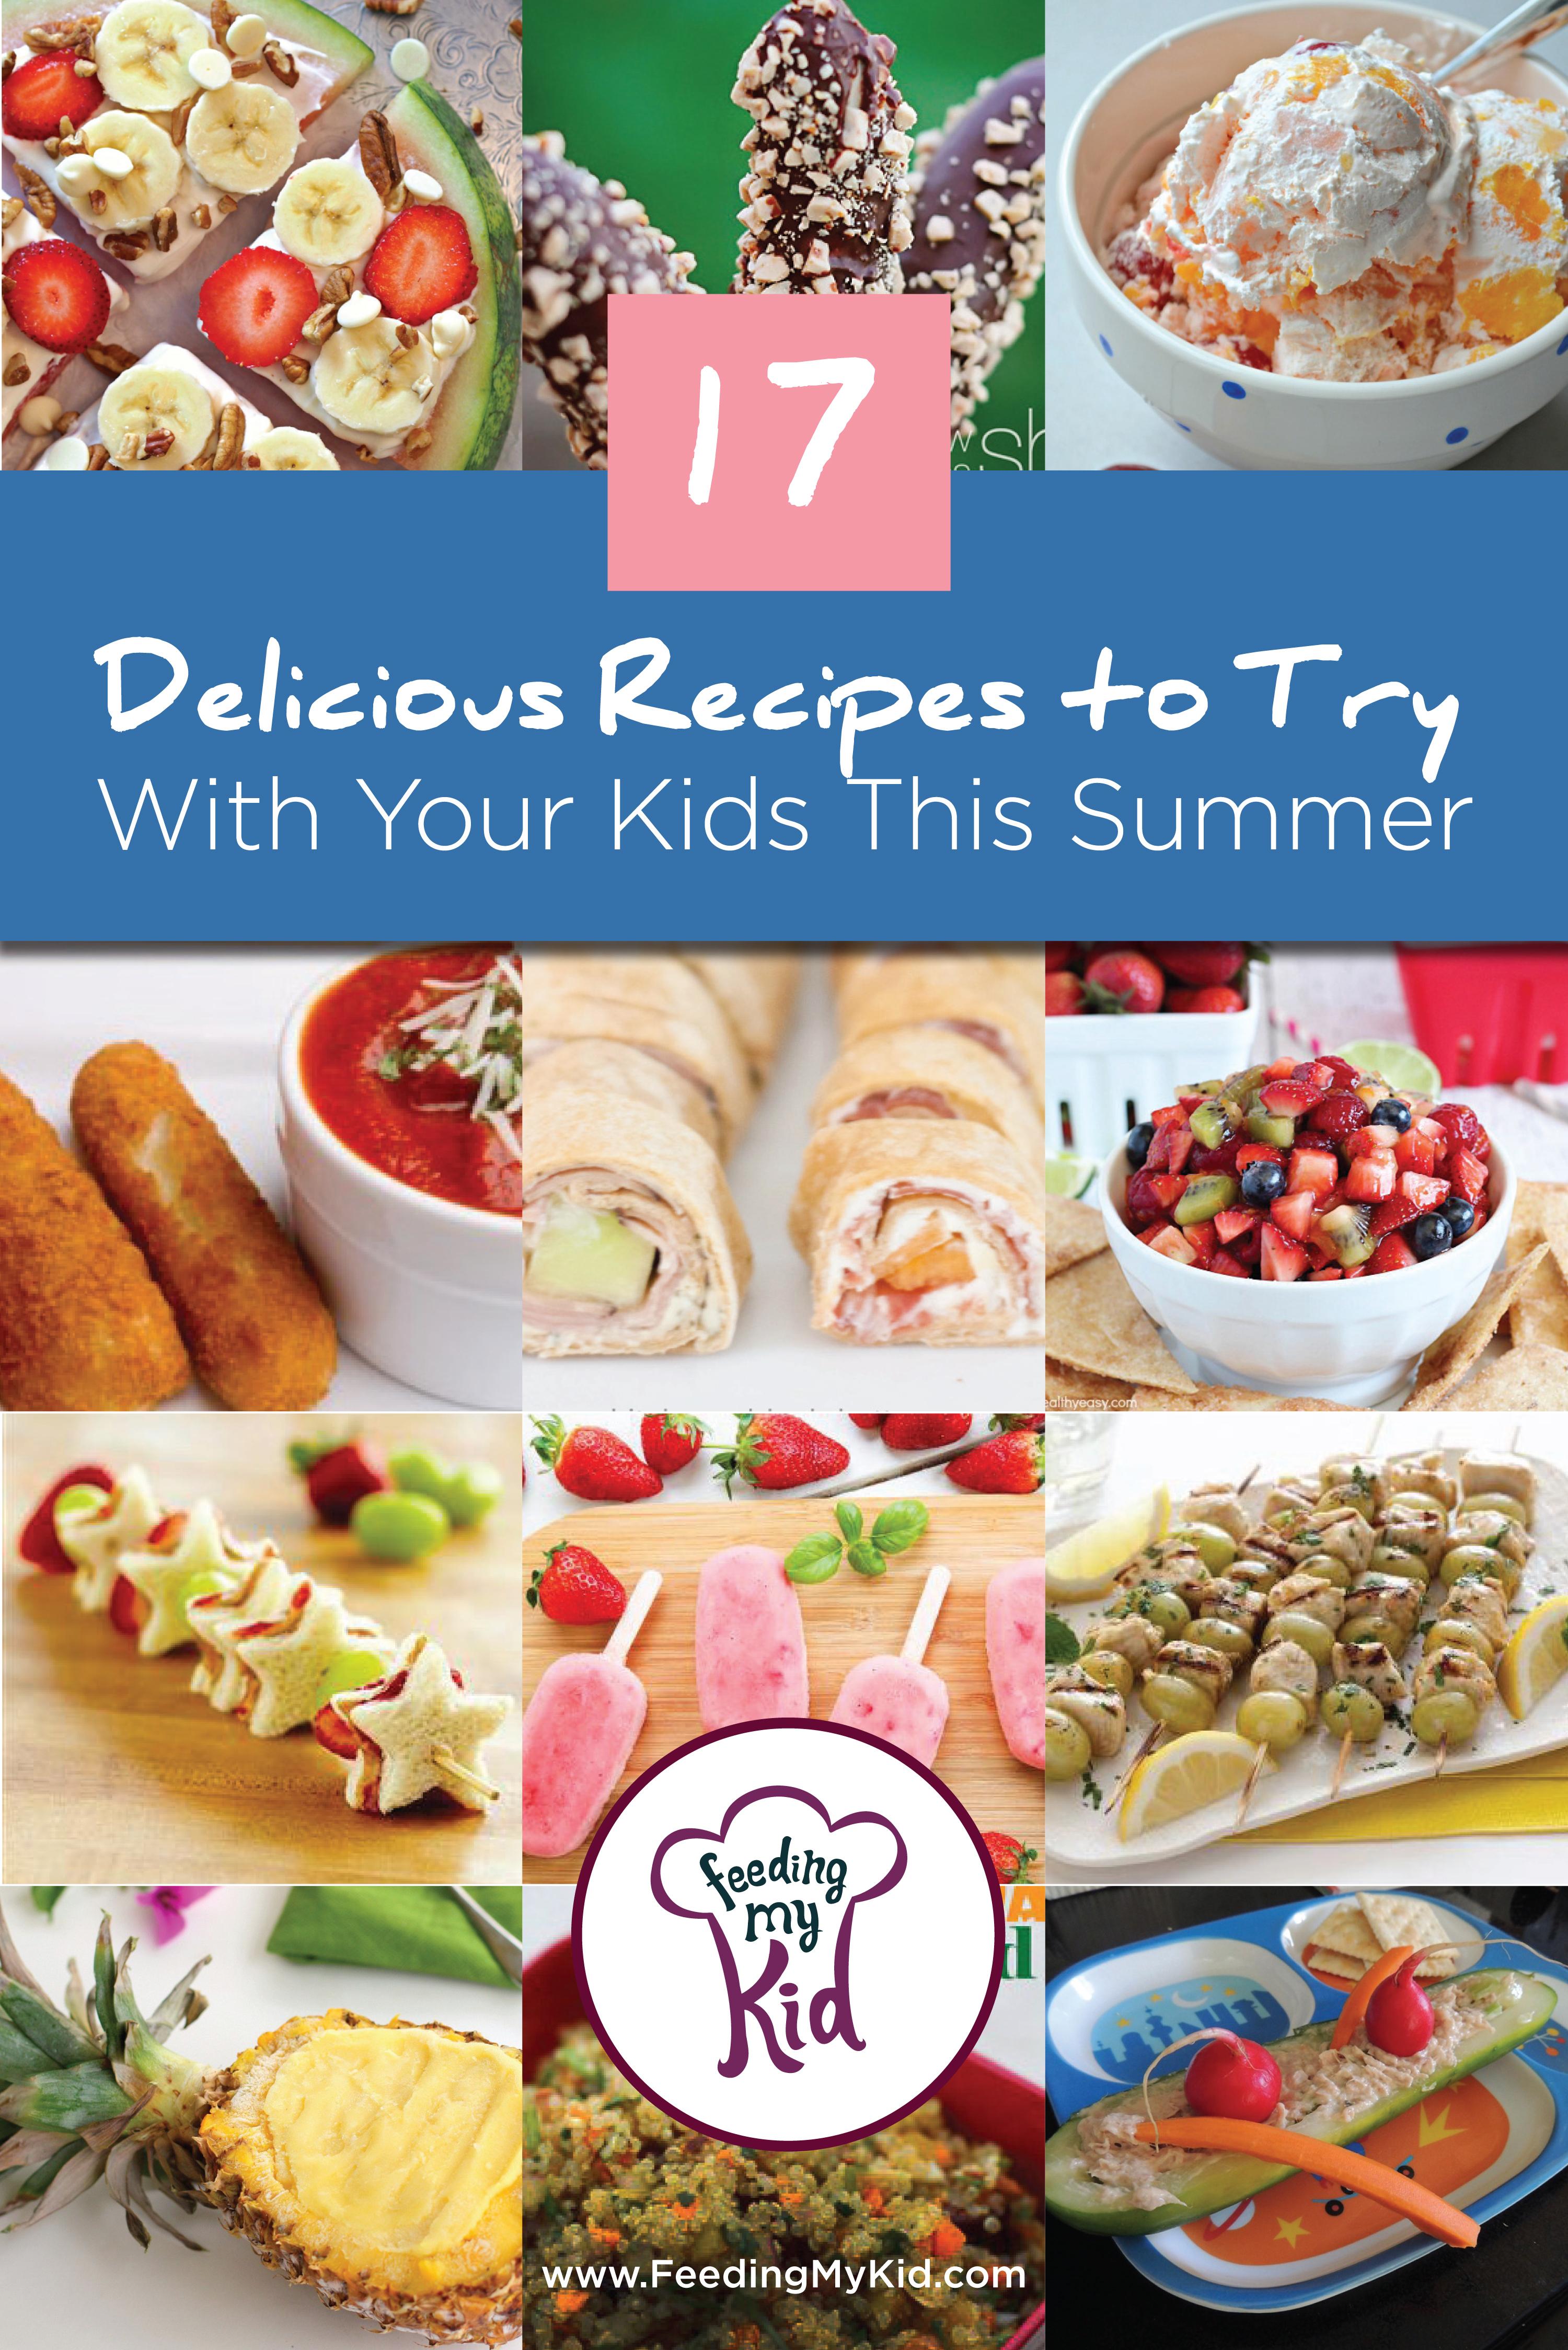 17 Delicious Recipes to Try With Your Kids This Summer